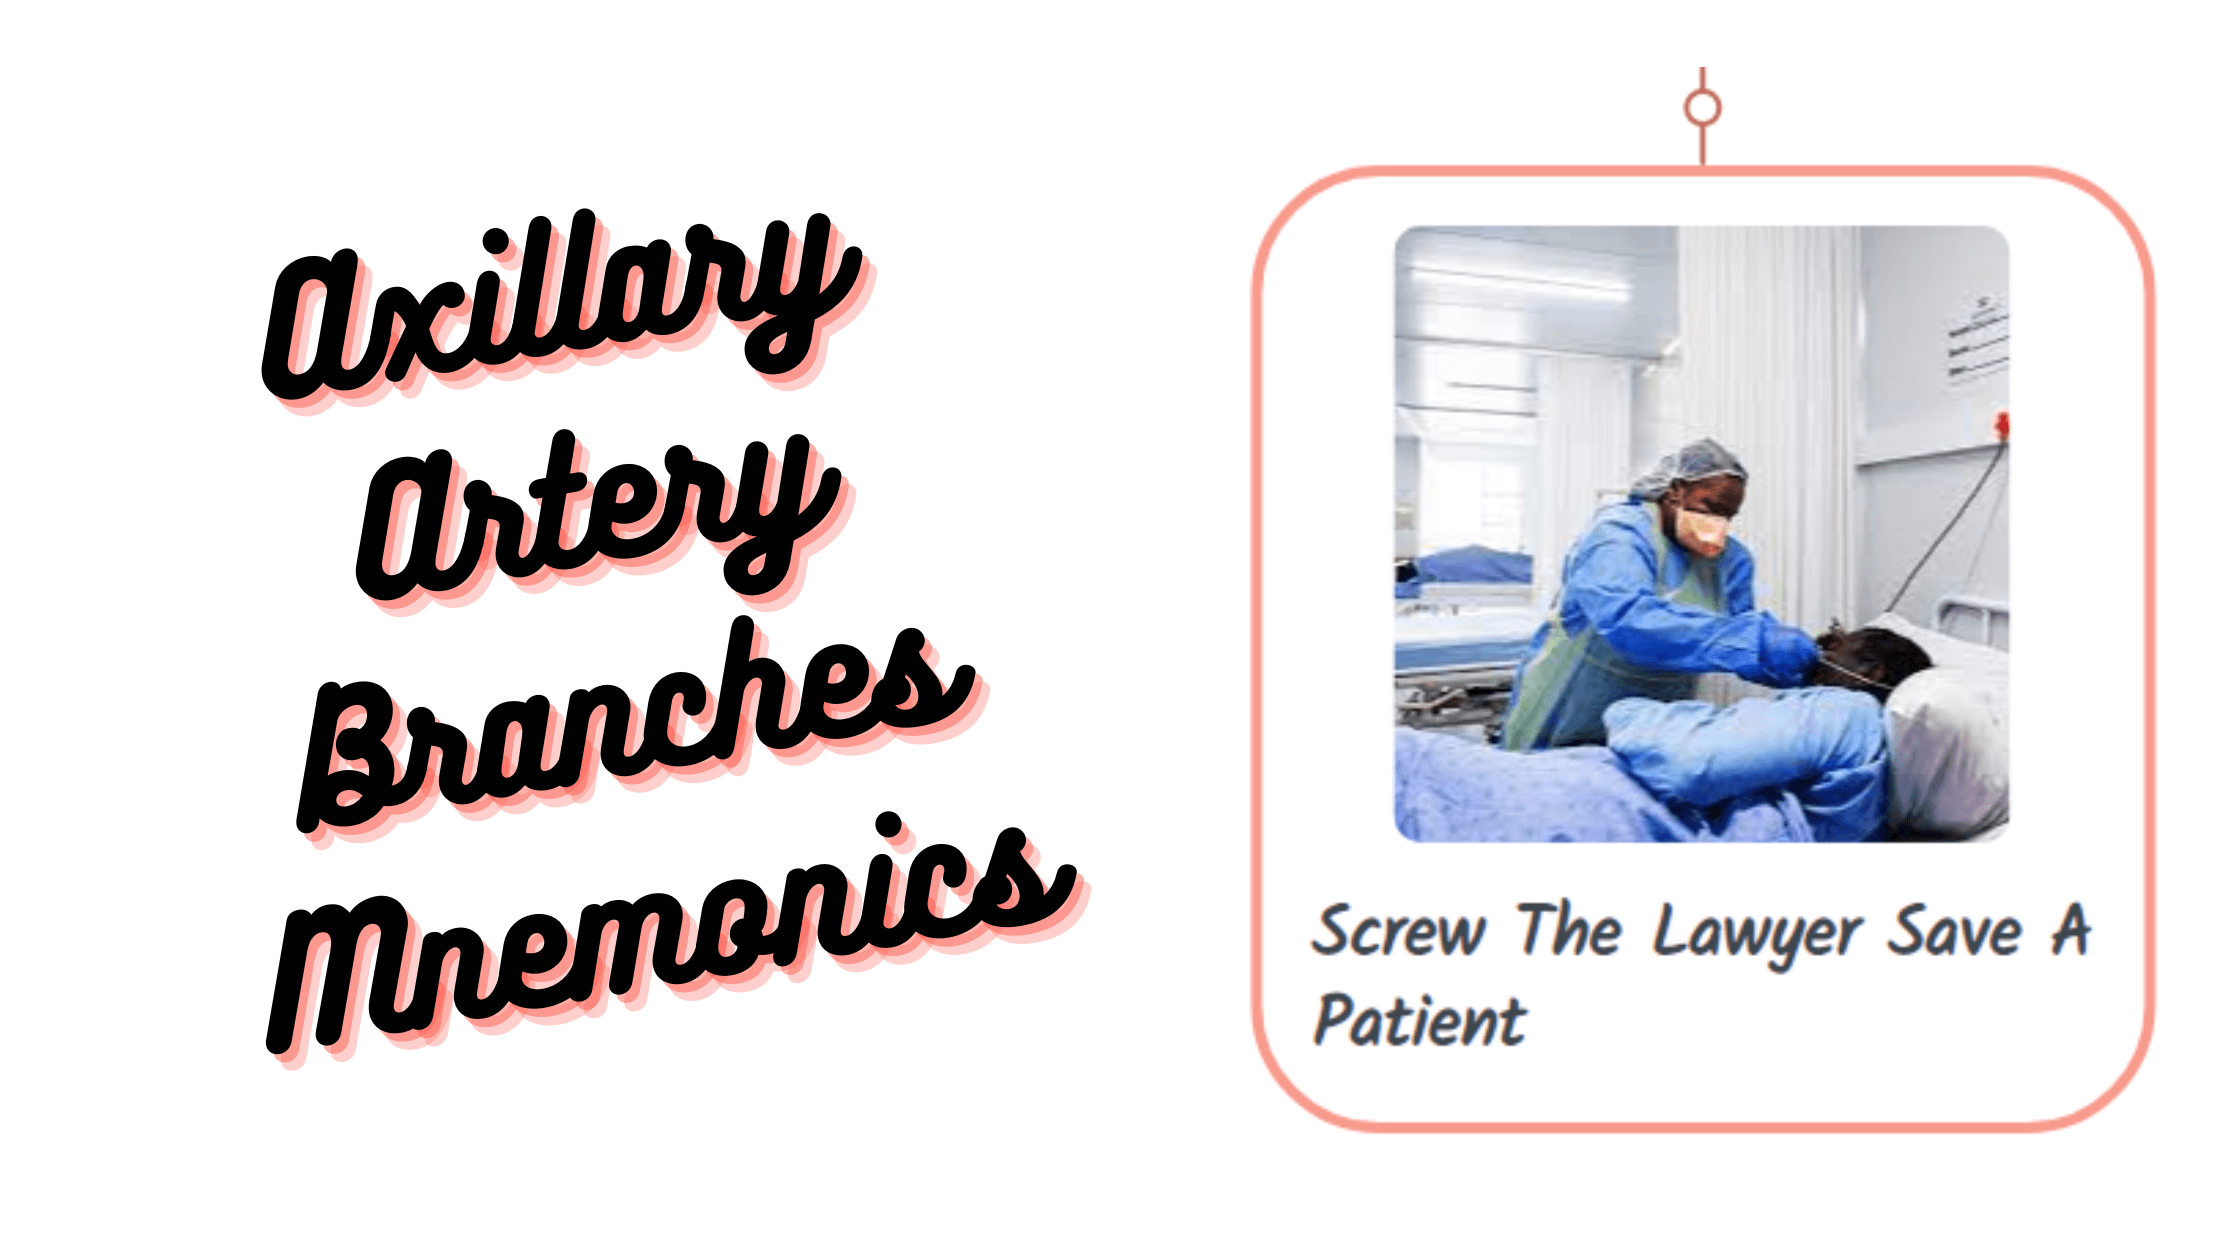 You are currently viewing Mnemonic: Axillary artery branches